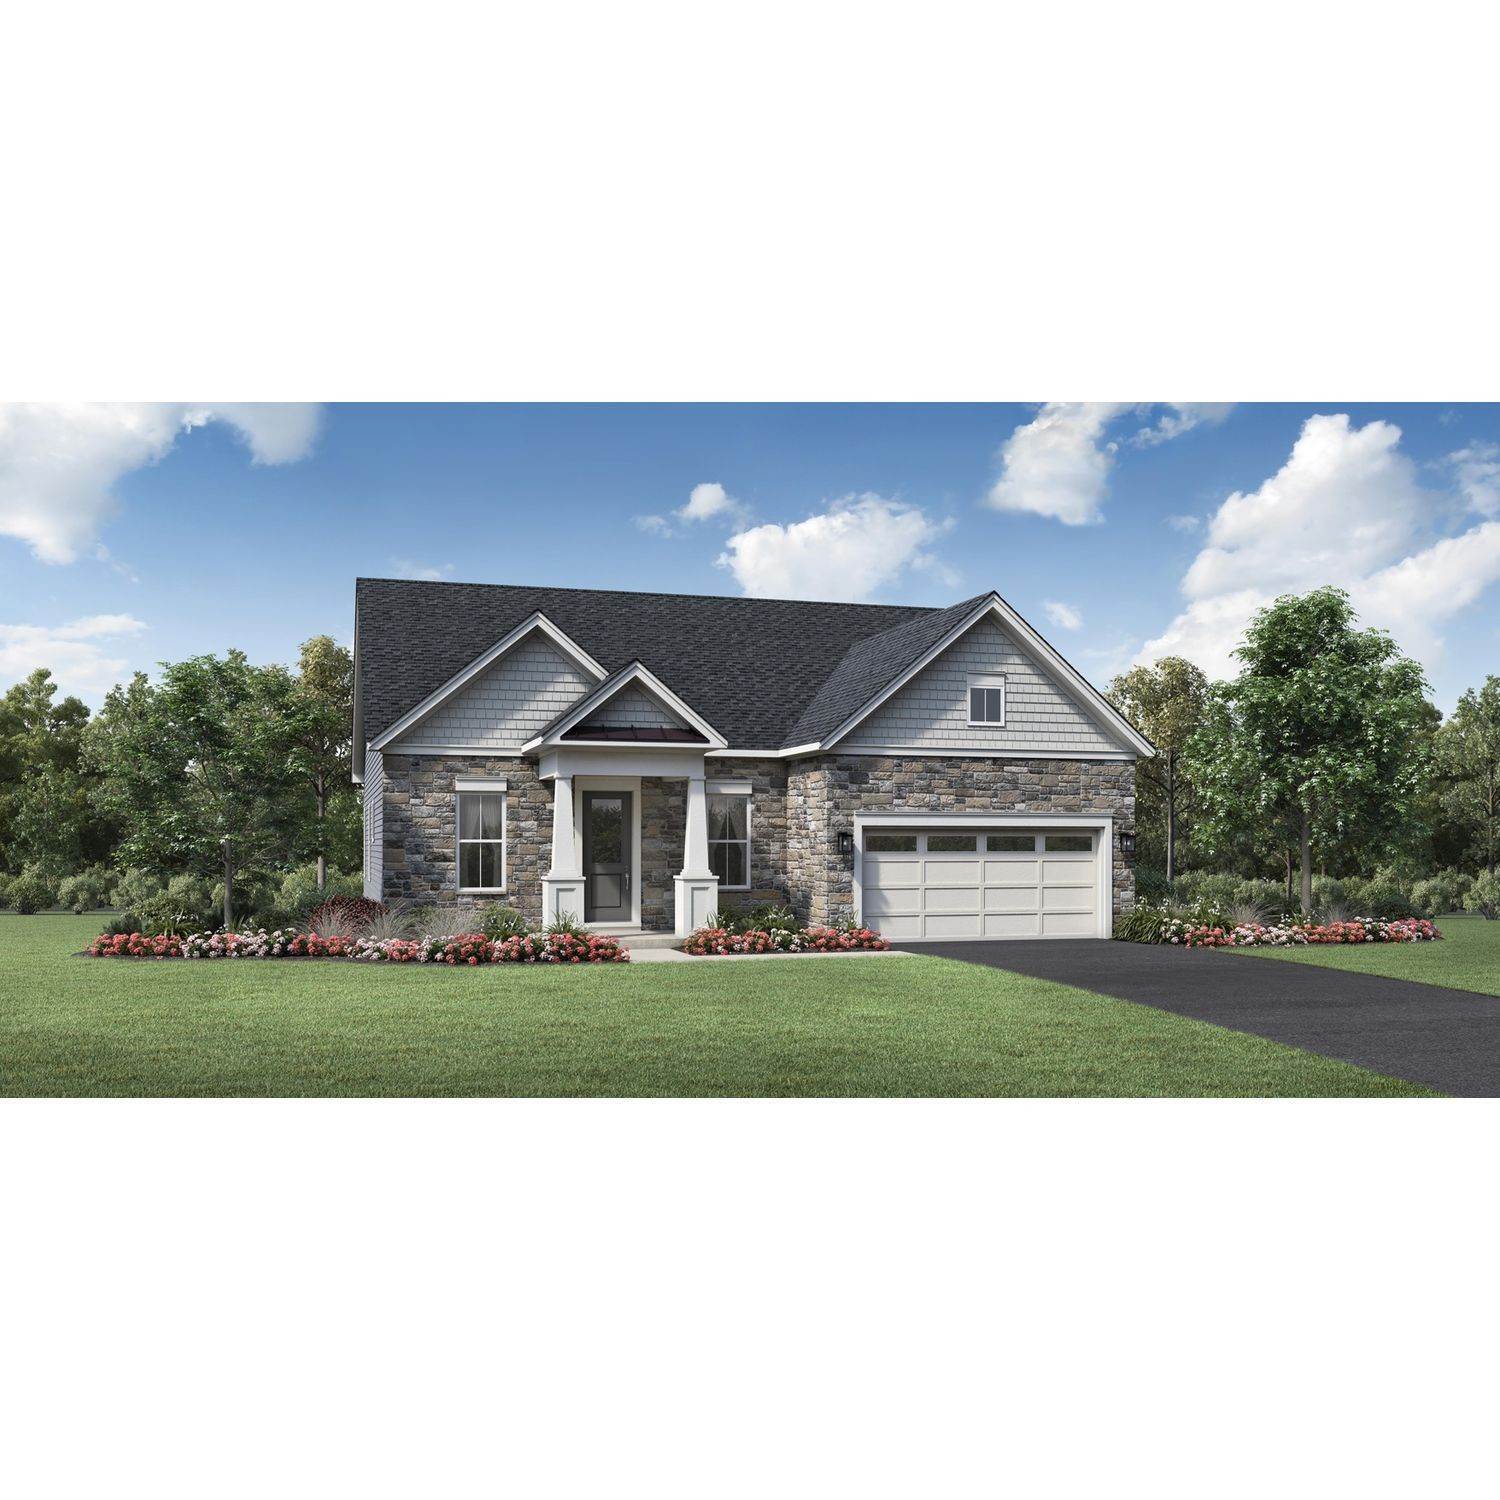 Single Family for Sale at Preserve At Marsh Creek - Regency Collection 5 Fetters Blvd, Downingtown, PA 19335